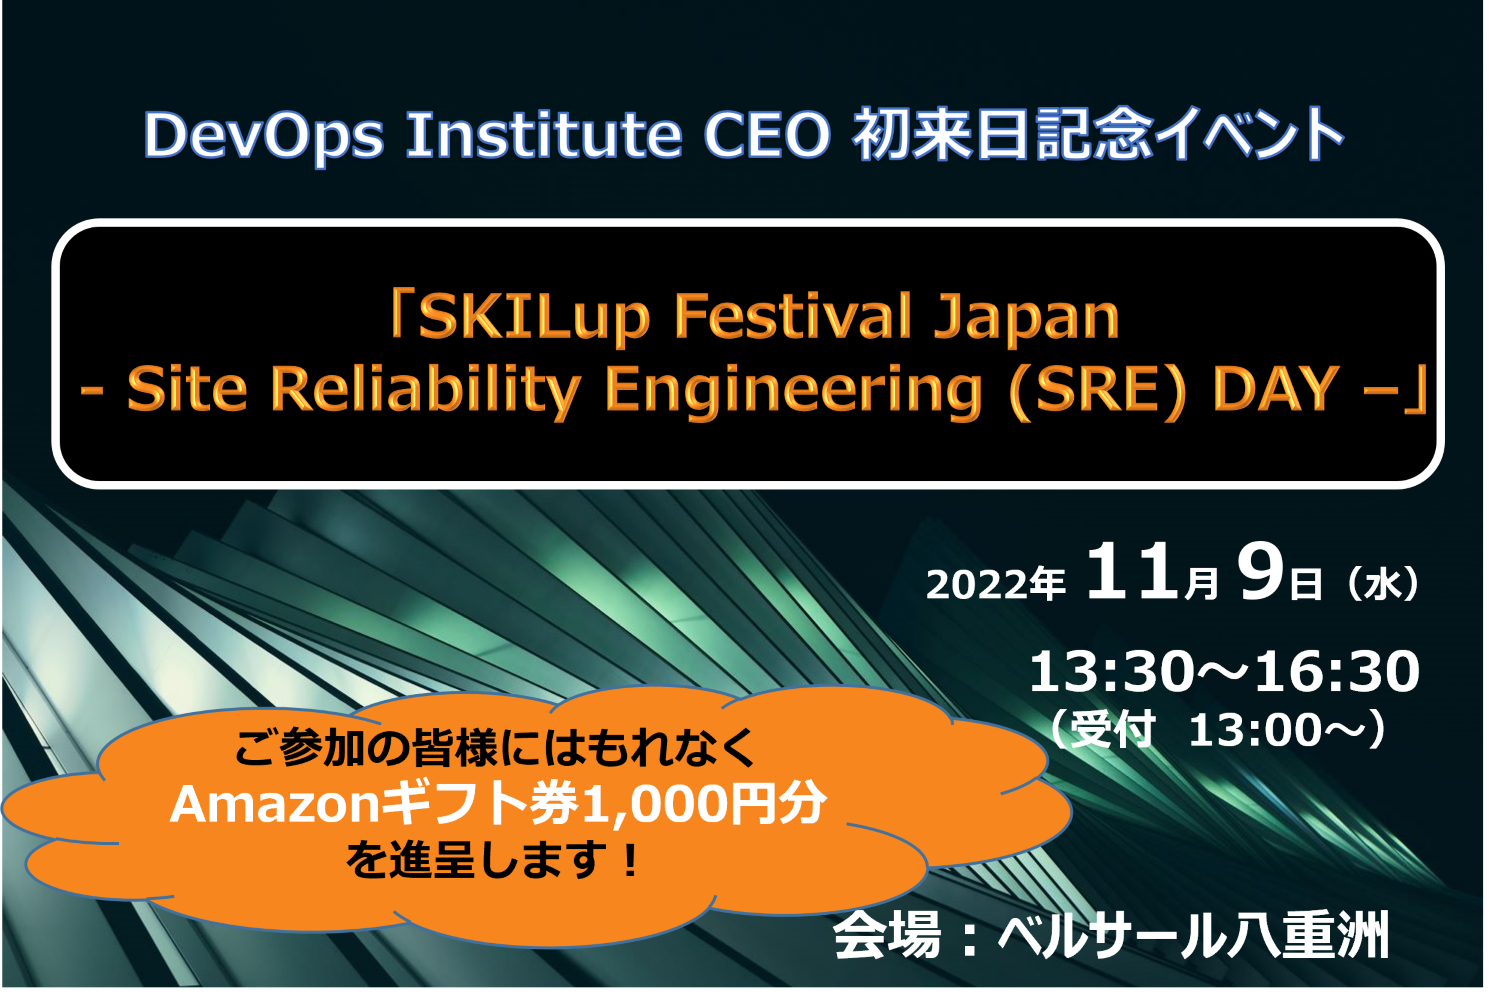 「SKILup Festival Japan - Site Reliability Engineering (SRE) DAY -」